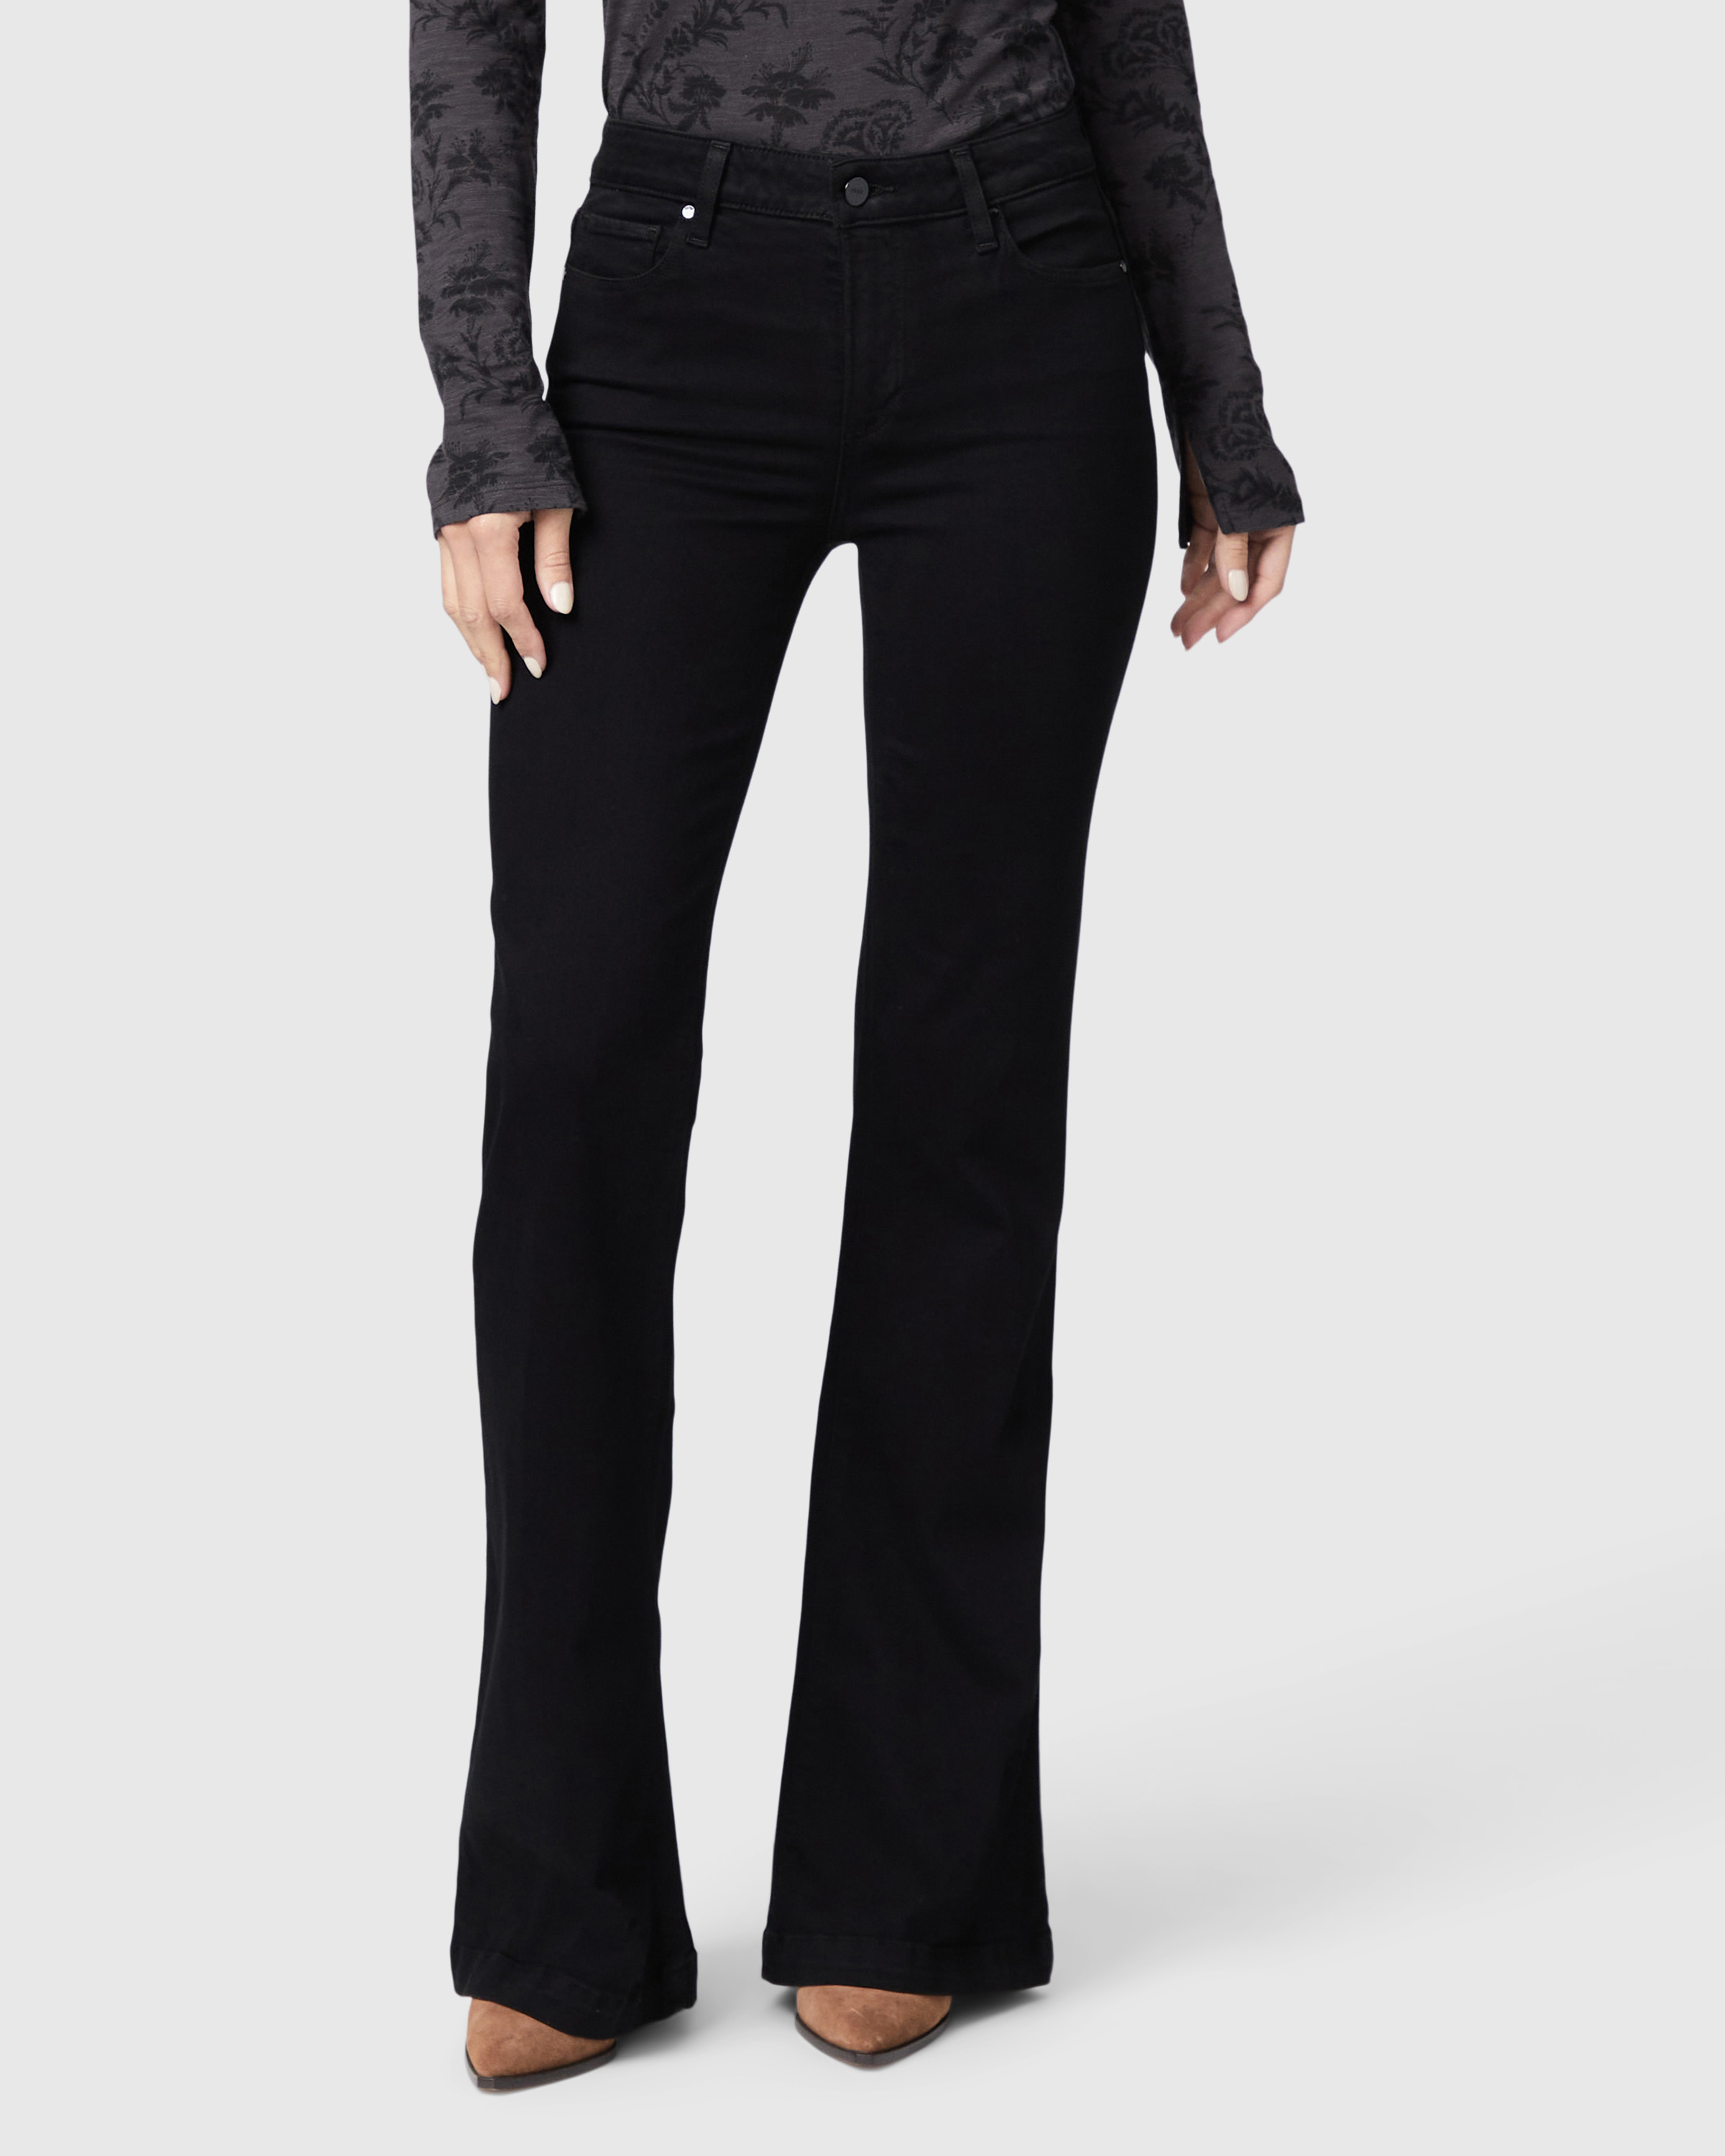 Black, White, & Colored Flare Jeans for Women | PAIGE®